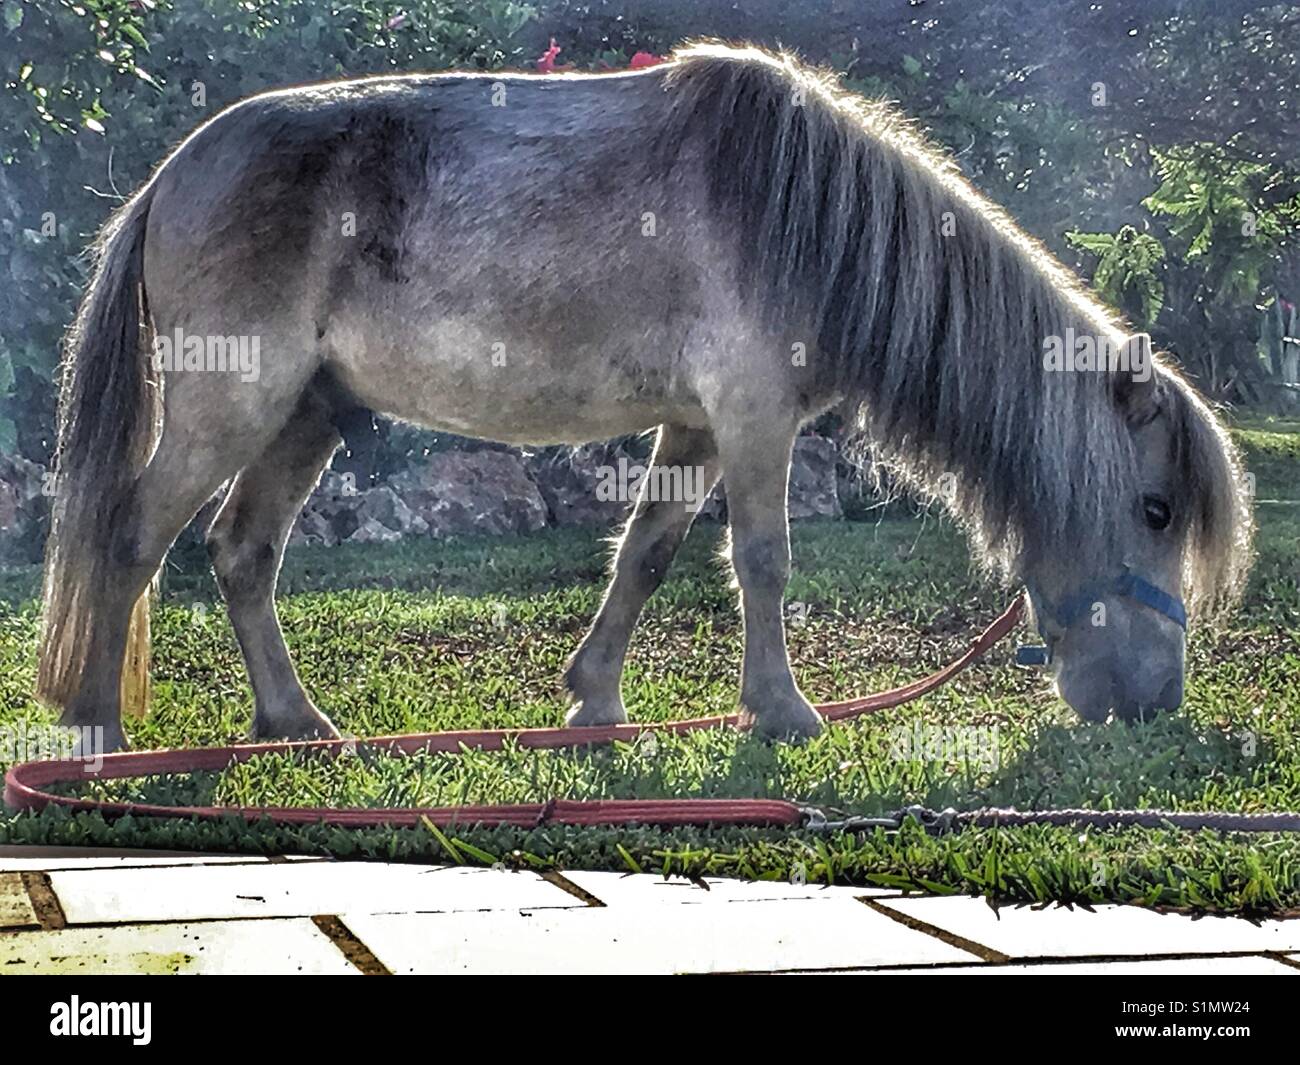 Falabella horse, grazing on the lawn Stock Photo